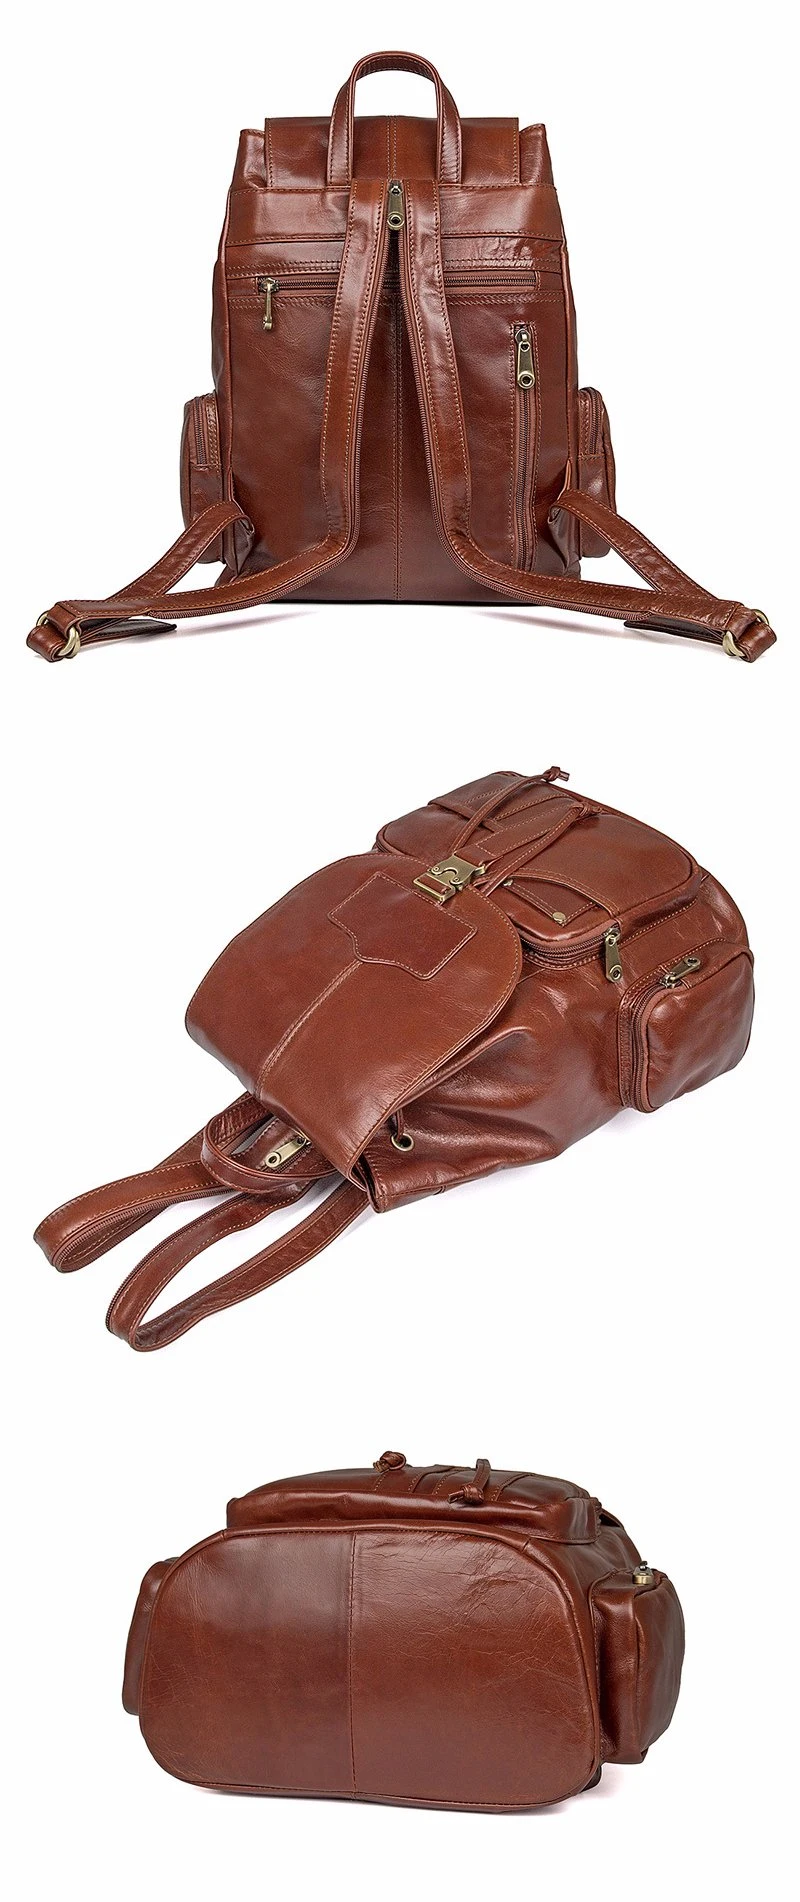 New Arrival Fashion Designer Bag Brown Real Leather Backpack for Women